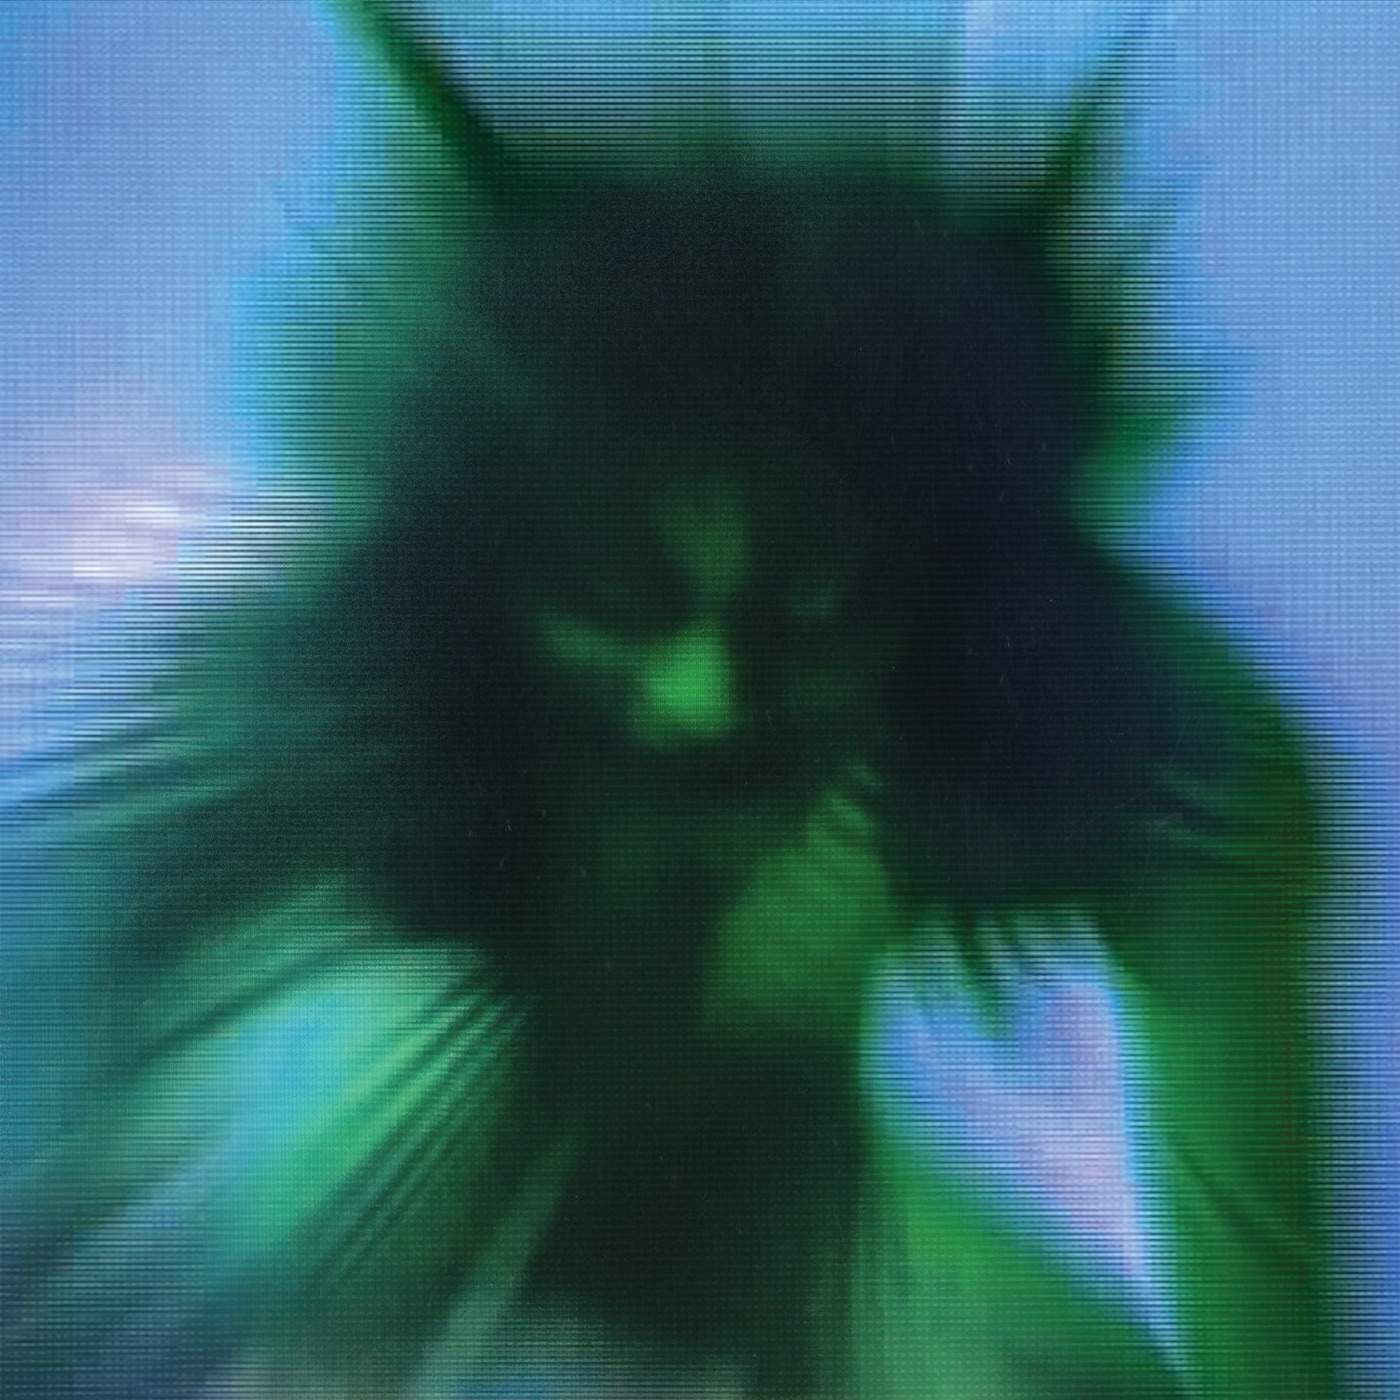 Safe In The Hands of Love by Yves Tumor